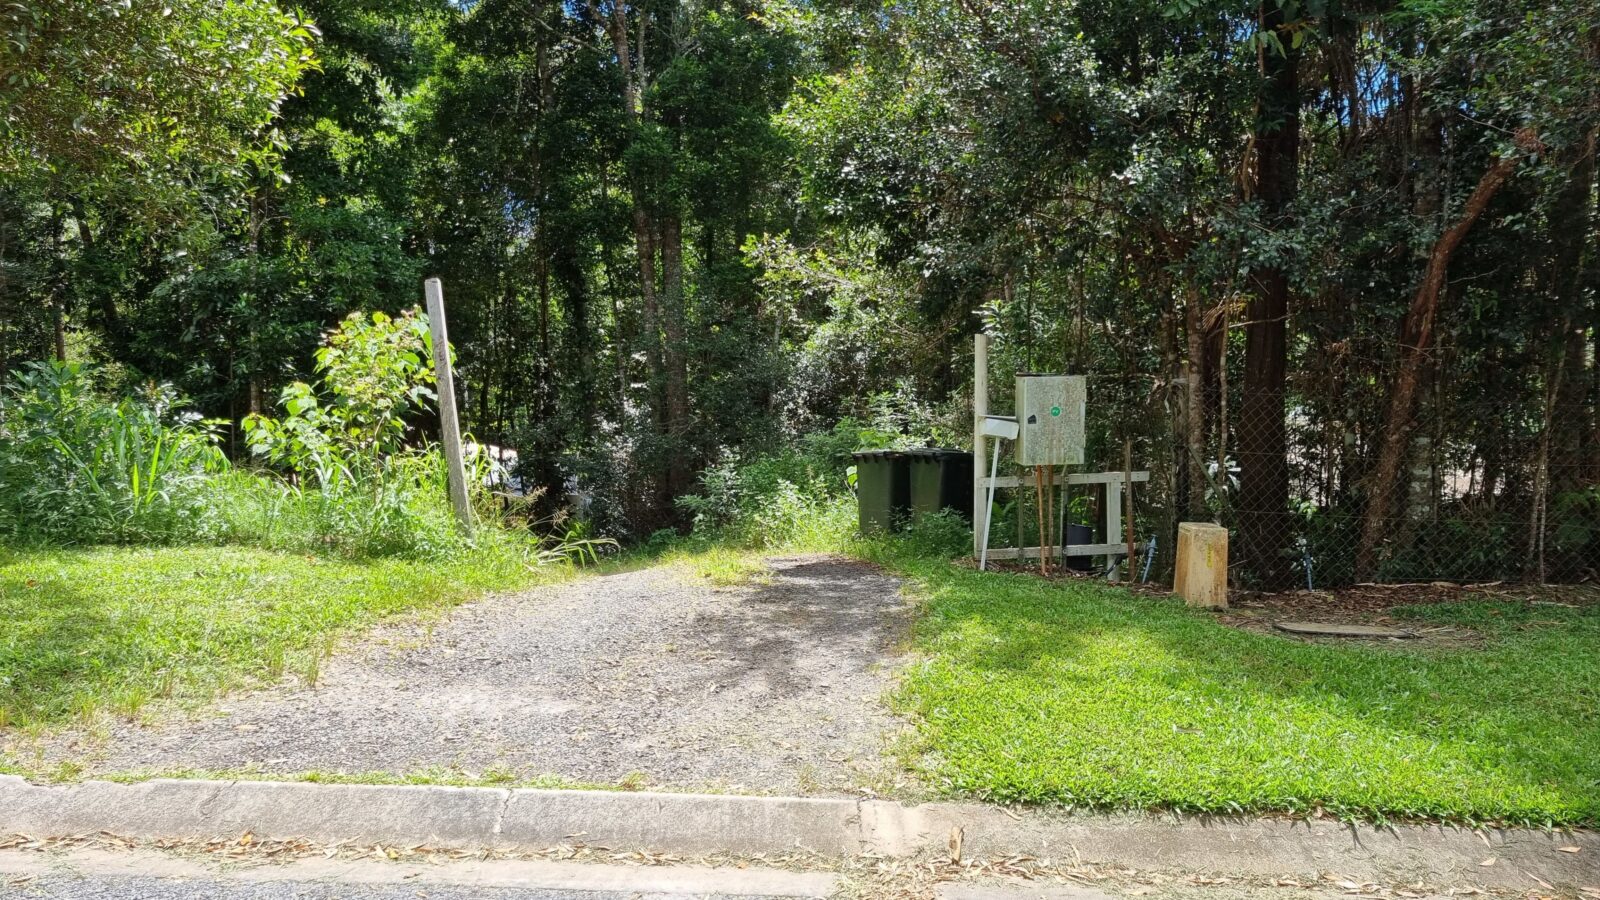 Entrance to property